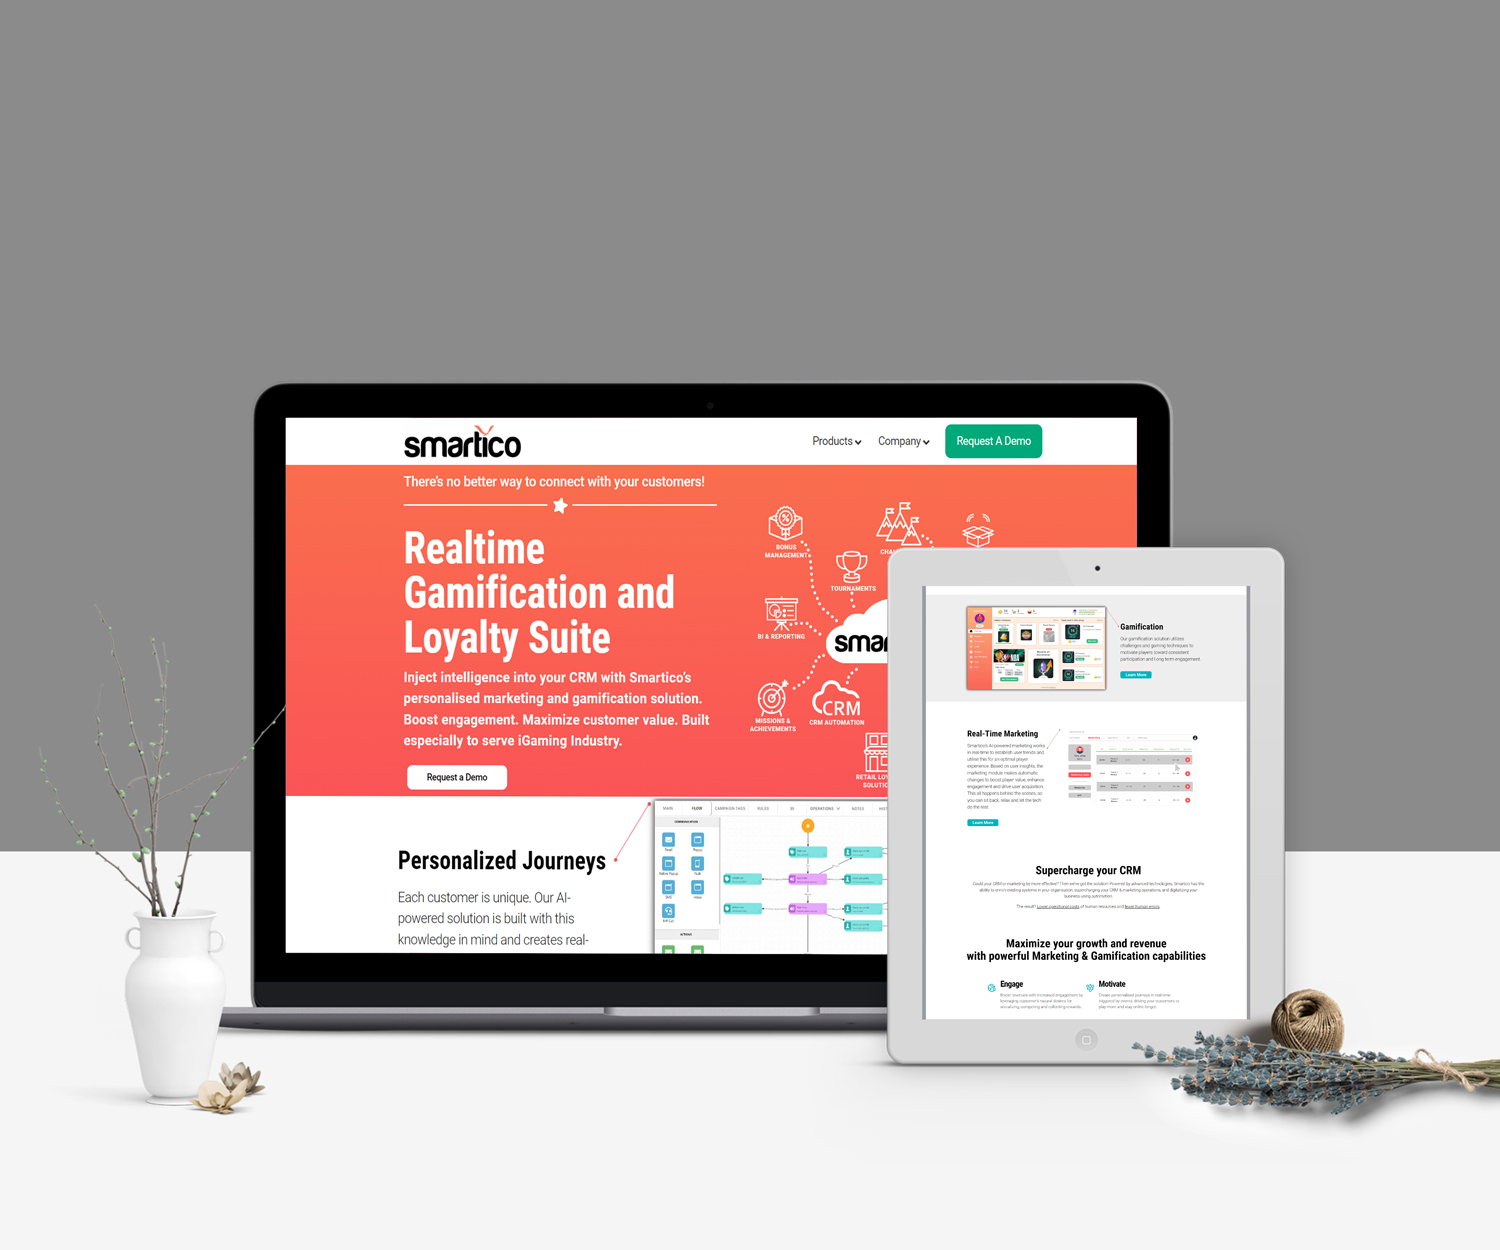 A complete guide on Gamification Software Smartico